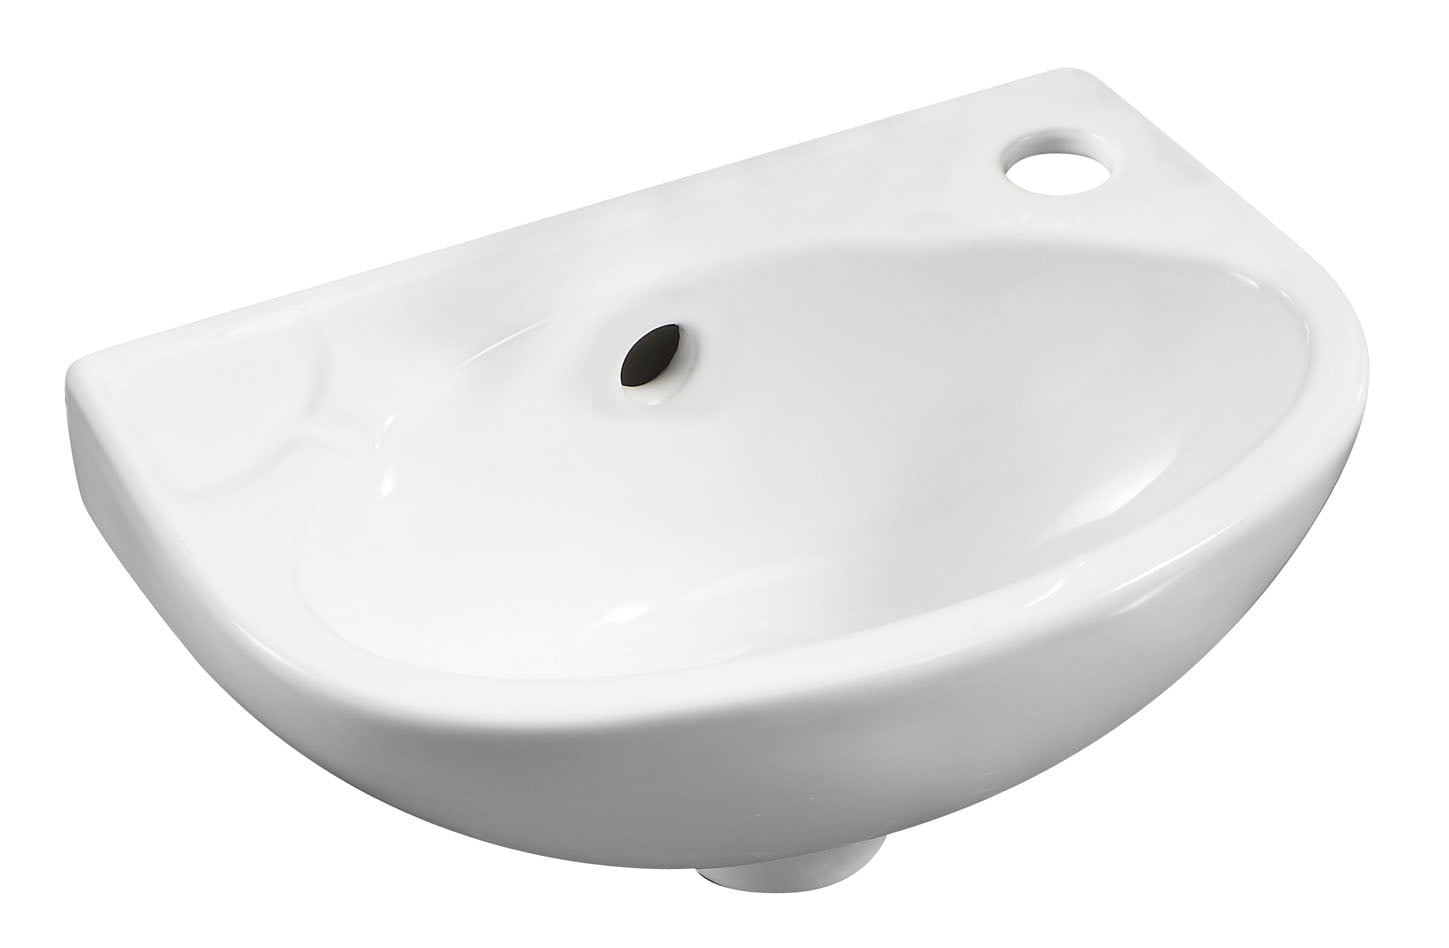 Picture of Alfi Brand ABC118 14 in. Small Wall Mounted Ceramic Sink with Faucet Hole, White